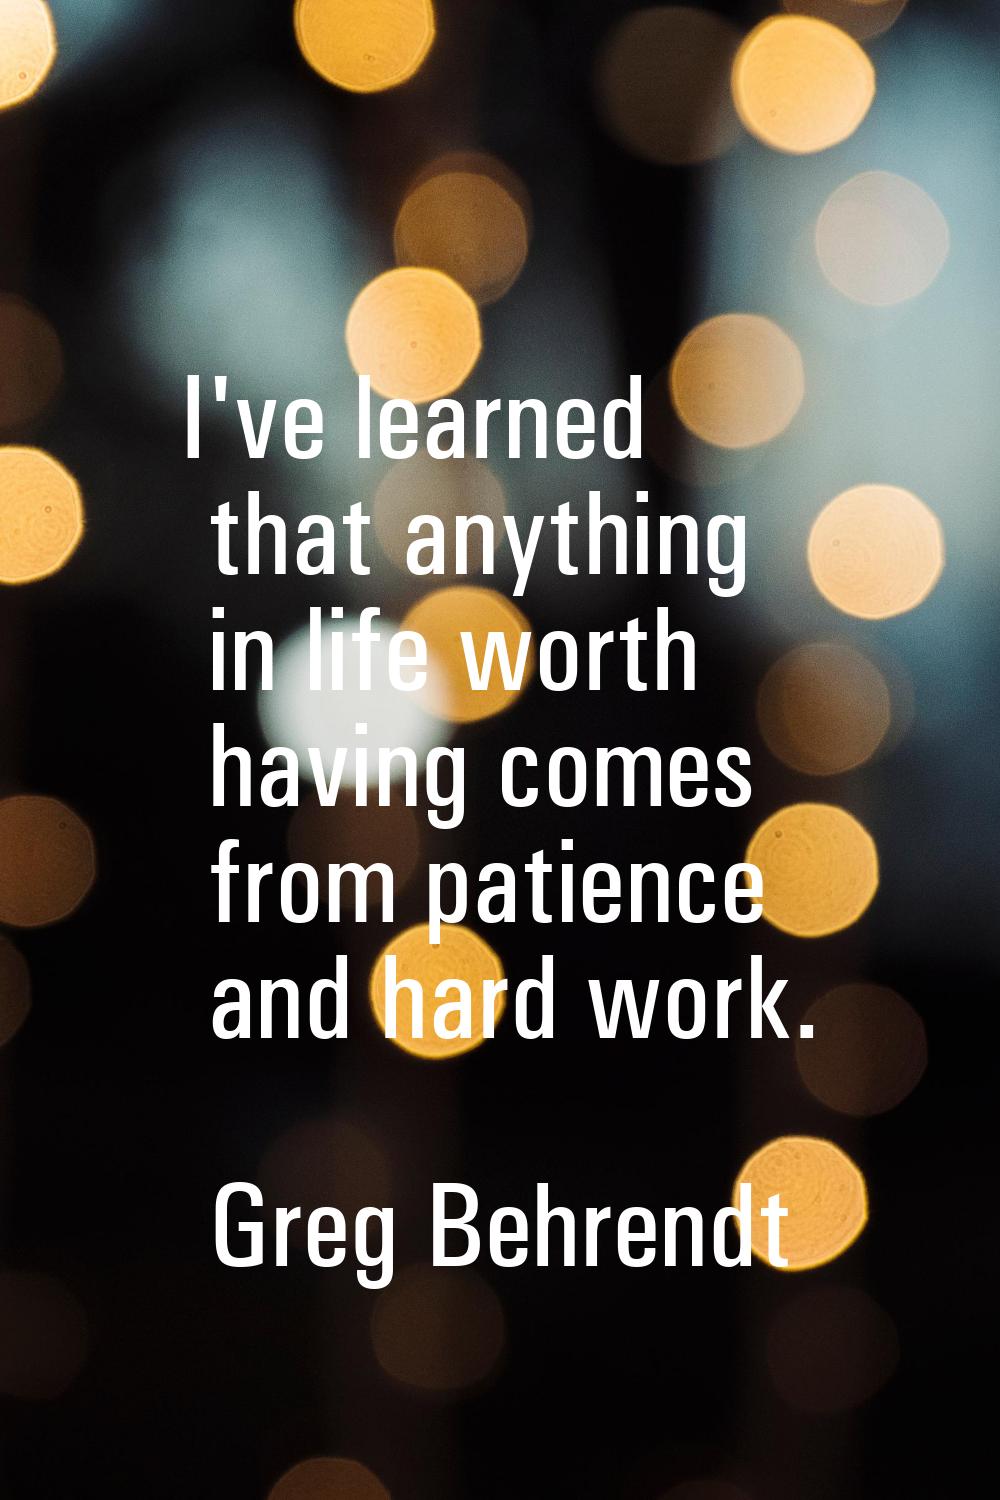 I've learned that anything in life worth having comes from patience and hard work.